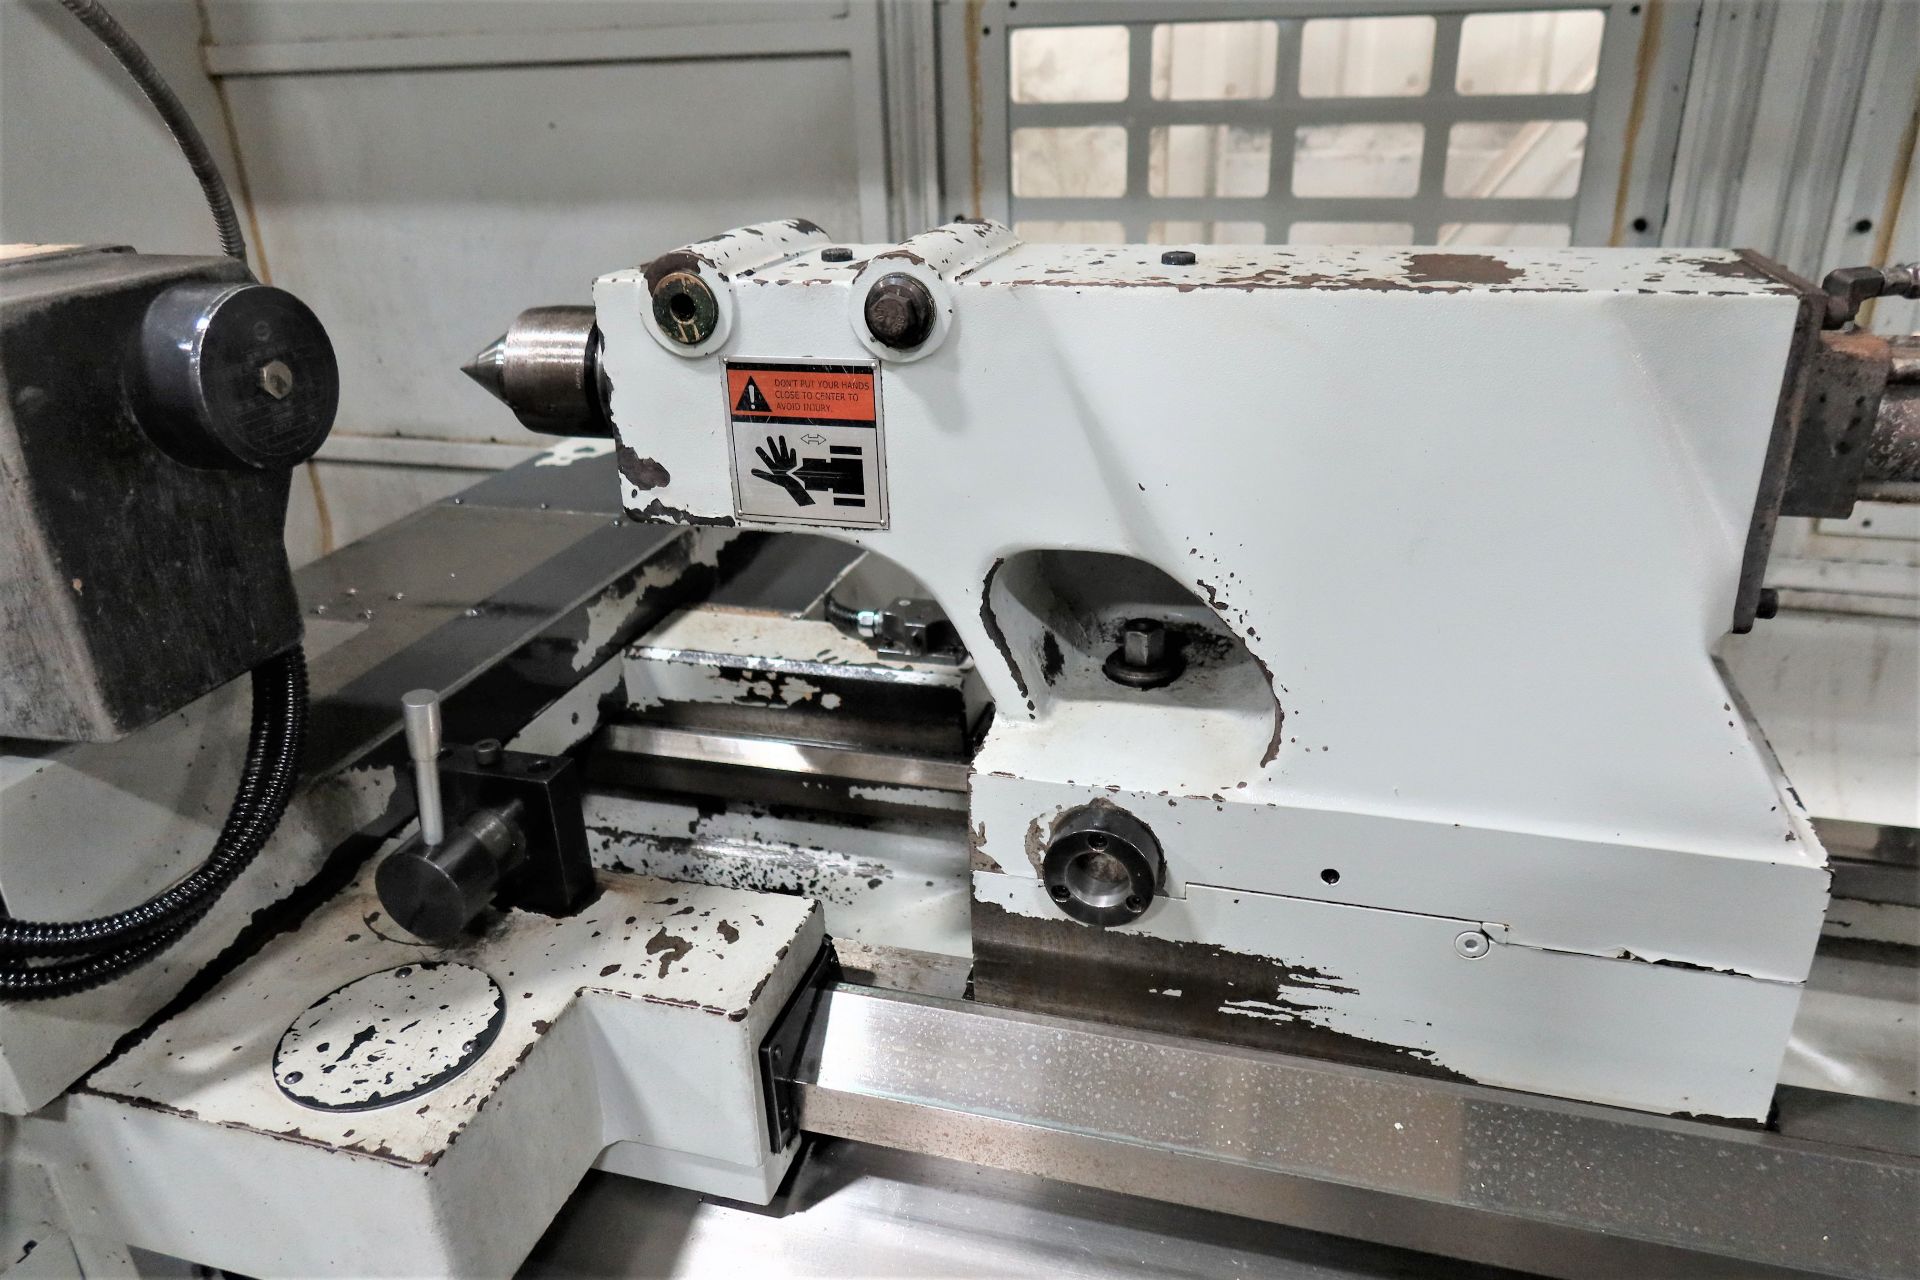 28"x120" Sunfirm 2-Axis CNC Flat Bed Turning Center Lathe, S/N 21232, New 2012 - Image 8 of 20